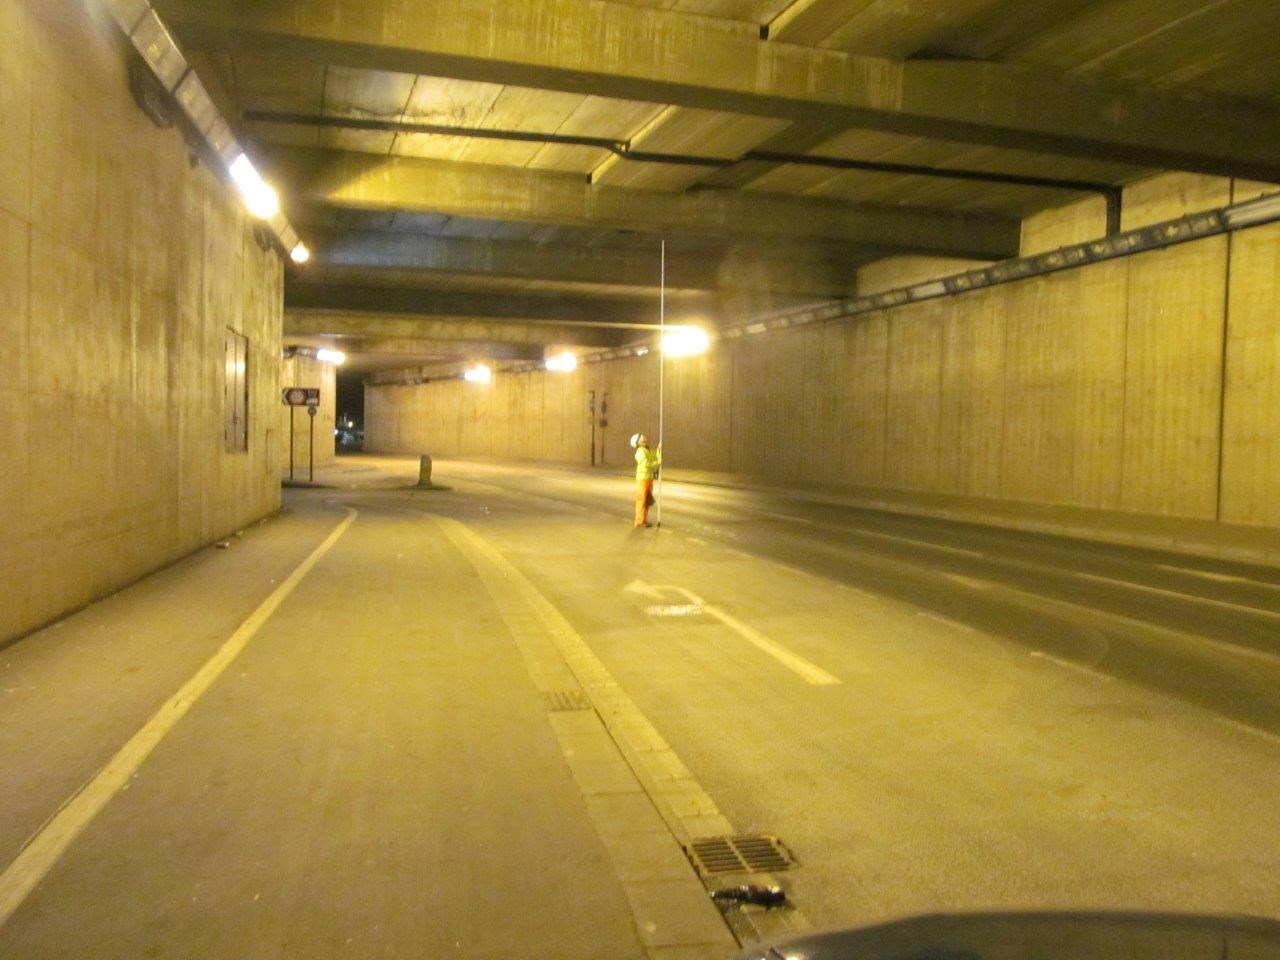 Workers in the tunnel under the Frenchgate Centre at night.